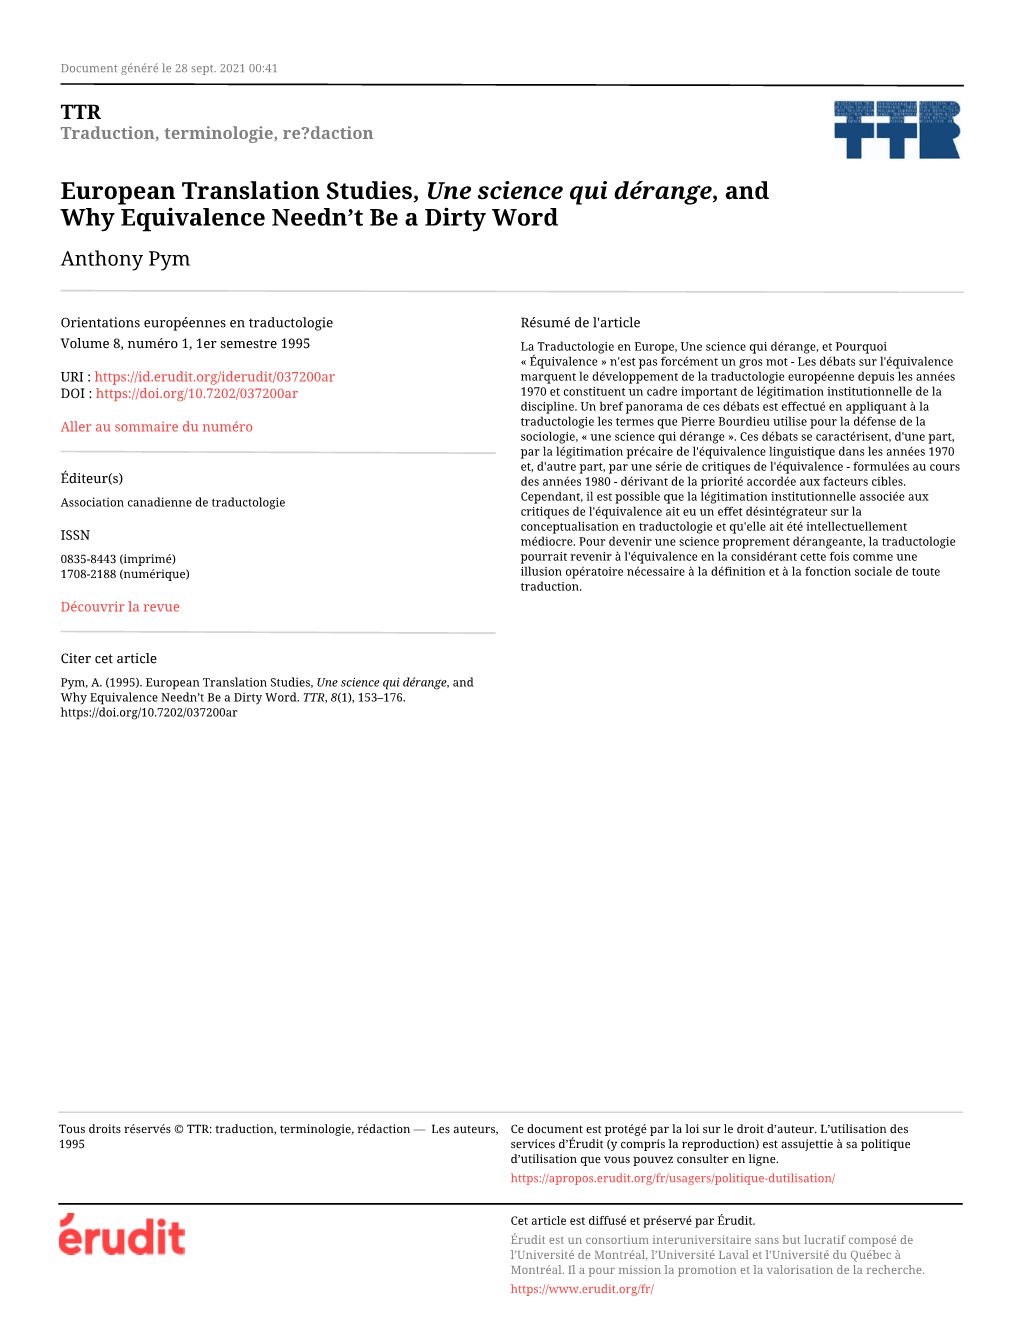 European Translation Studies, Une Science Qui Dérange, and Why Equivalence Needn’T Be a Dirty Word Anthony Pym